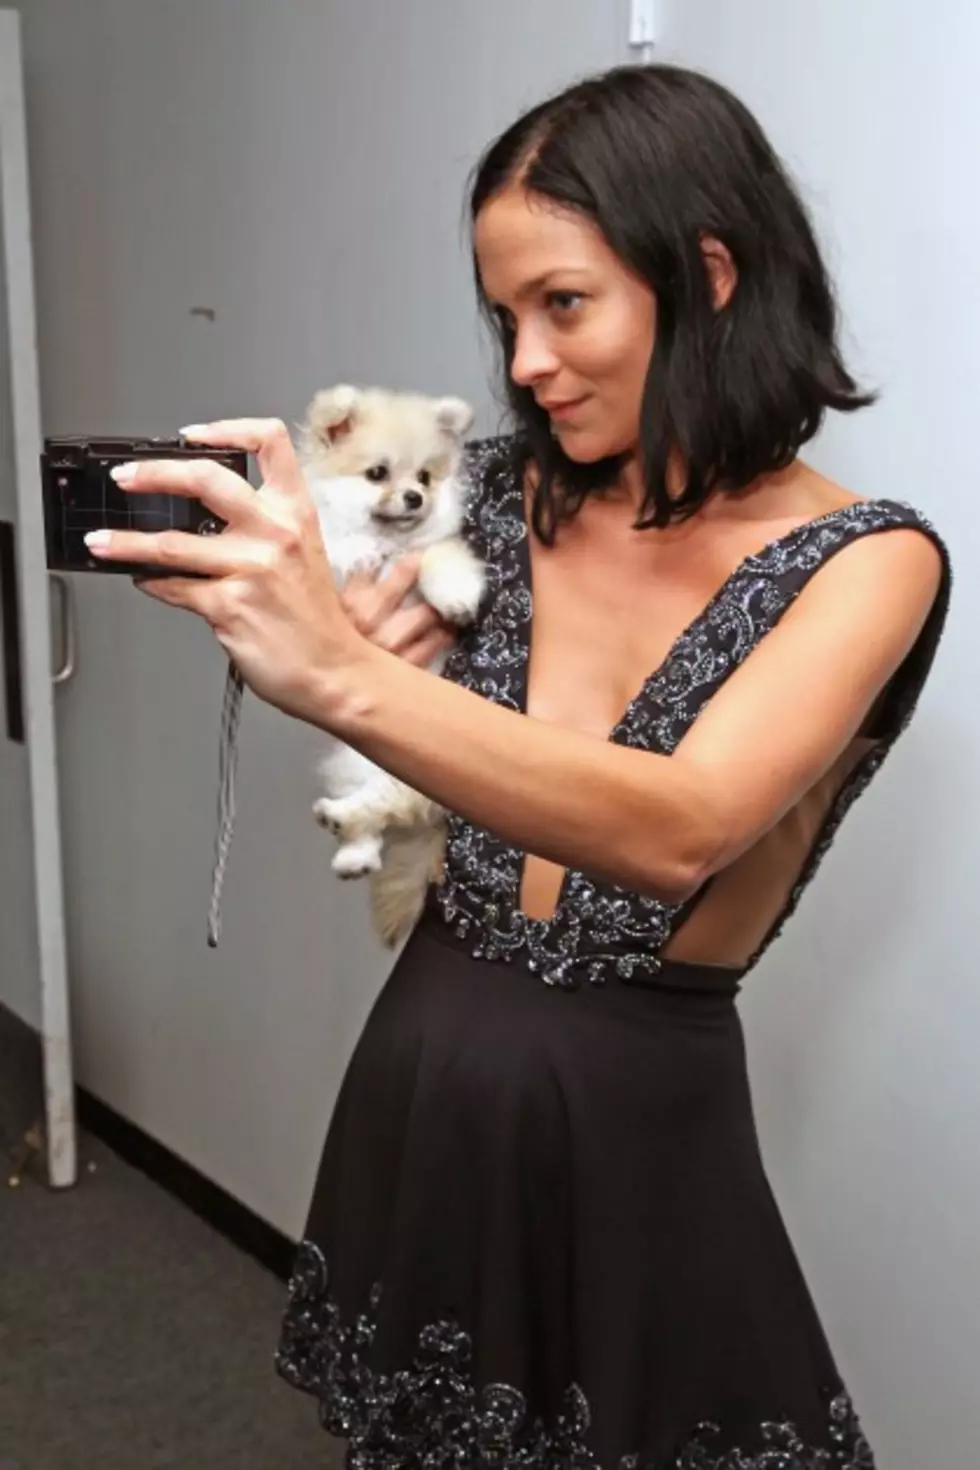 New Device For Taking Selfies With Your Dog [Video]